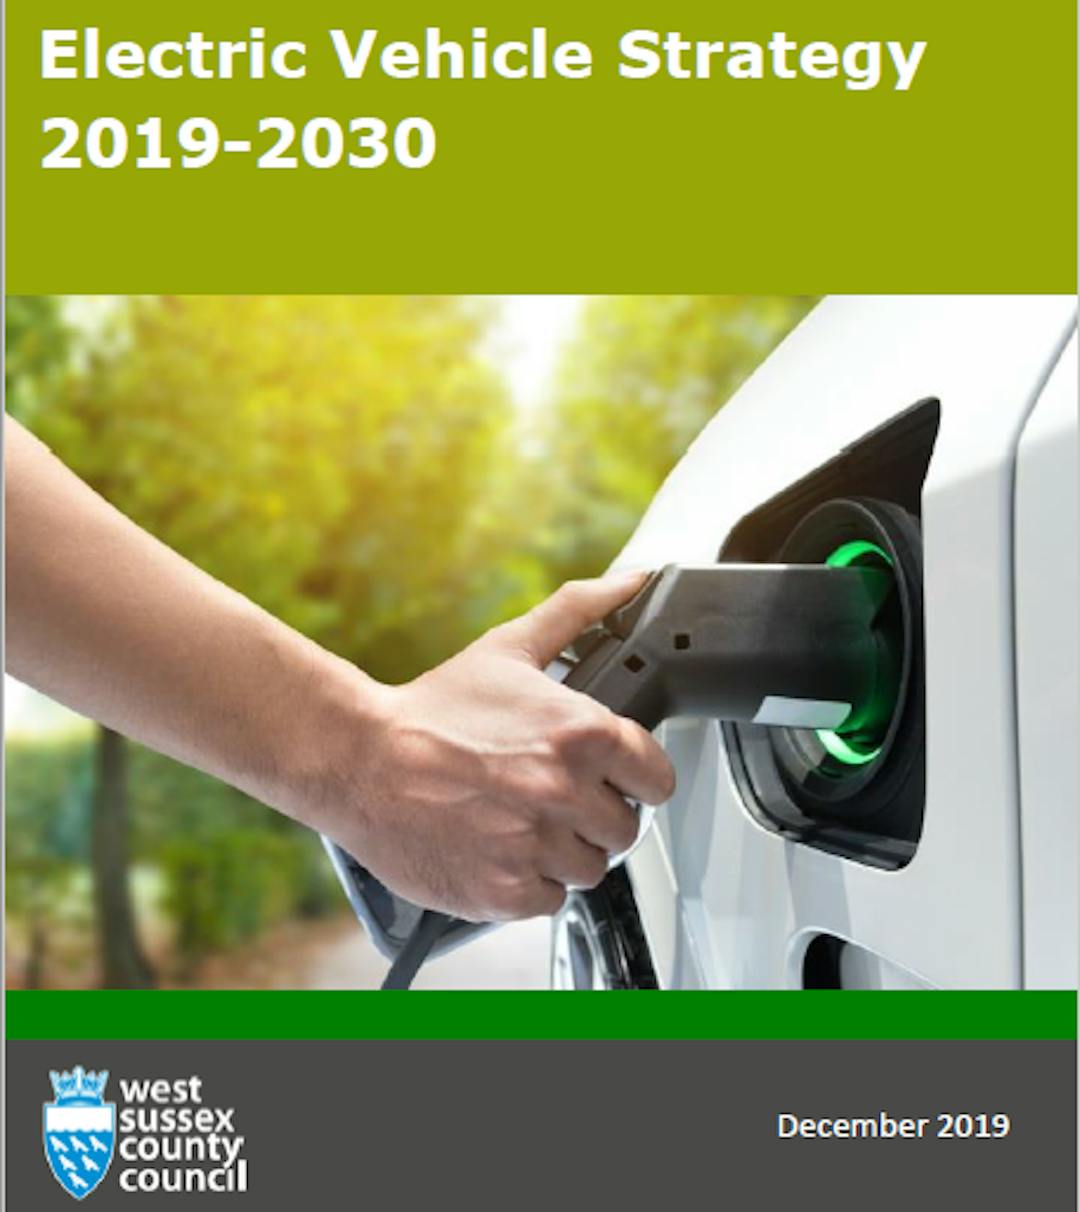 Image of the Consultation Draft of the Electric Vehicle Strategy 2019-2030